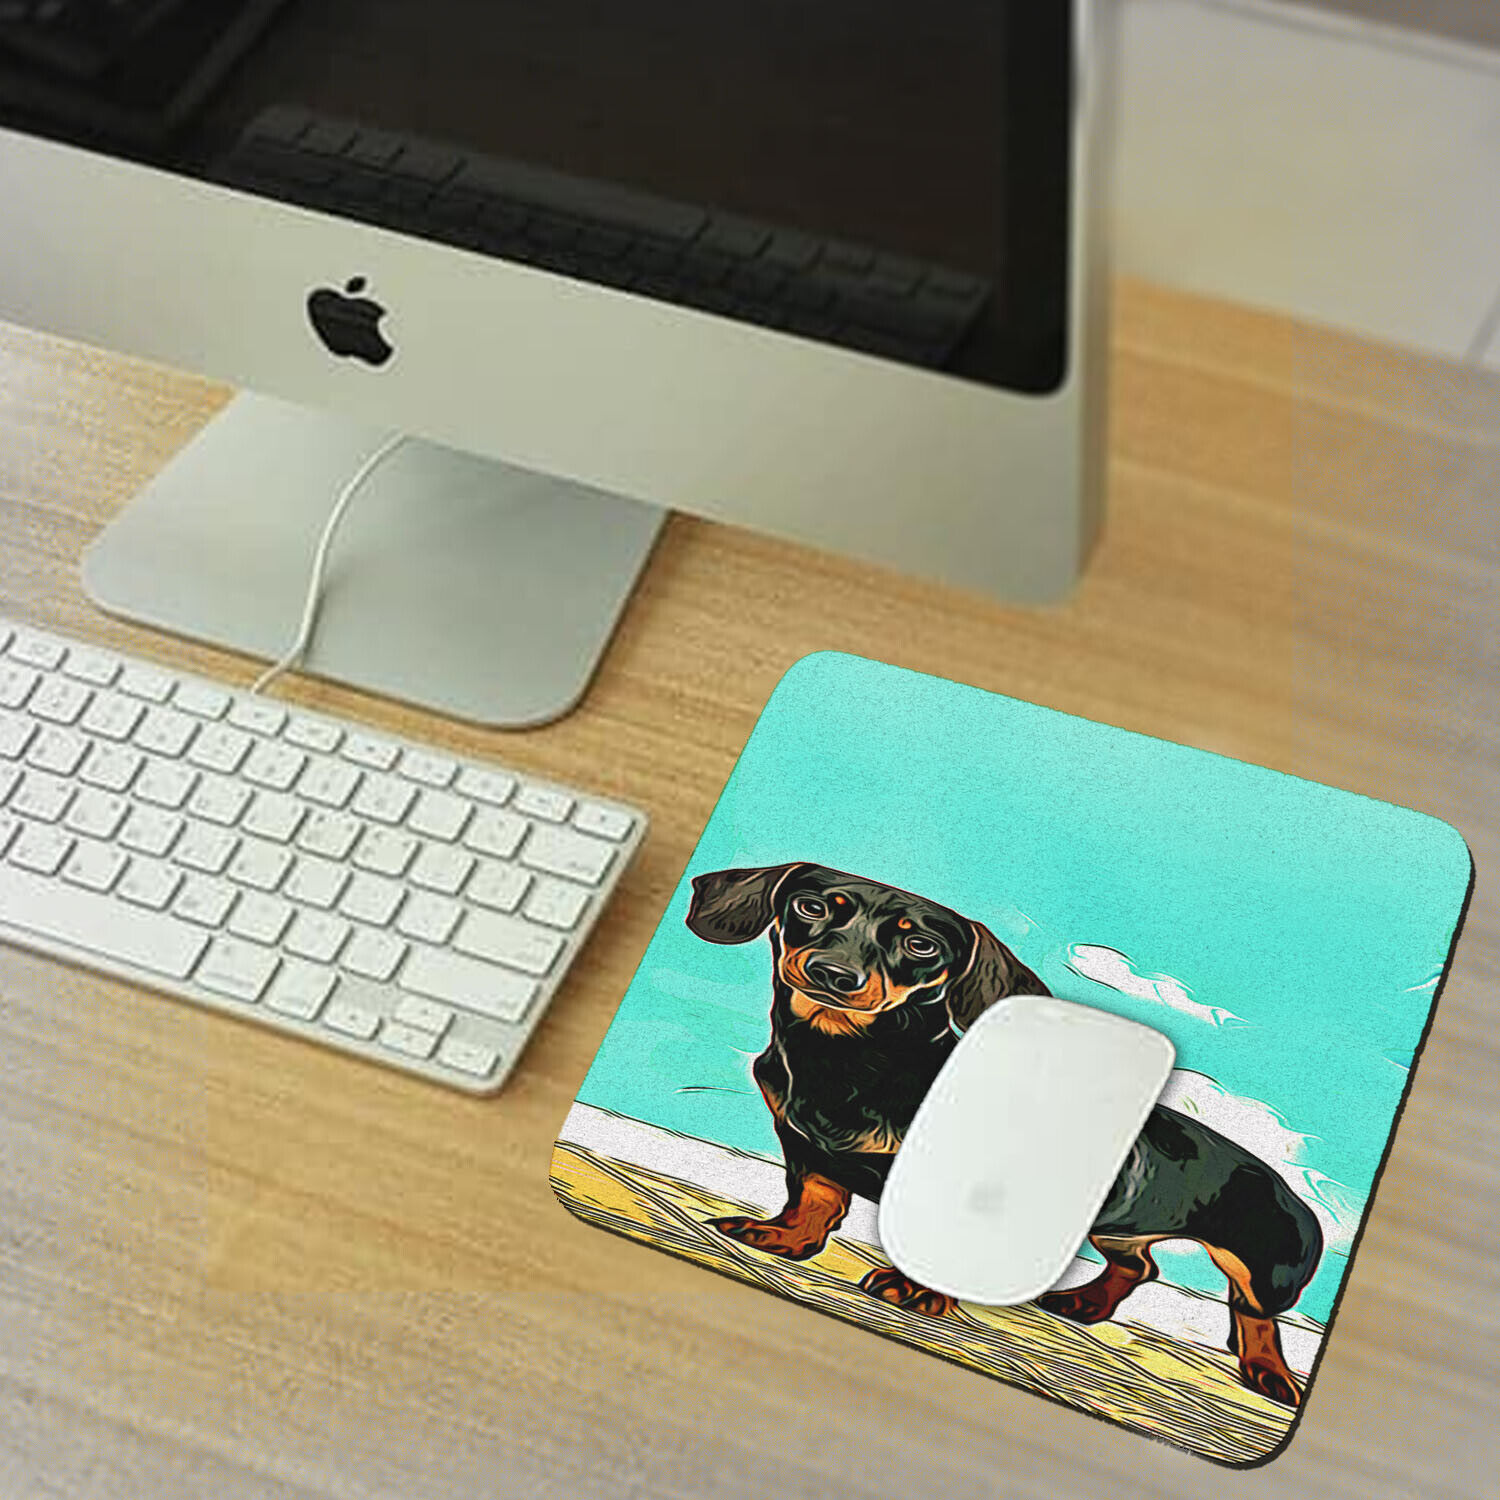 Adorable Dachshund Puppy - Rubber Mouse Pad Soft Waterproof for Dog Lovers